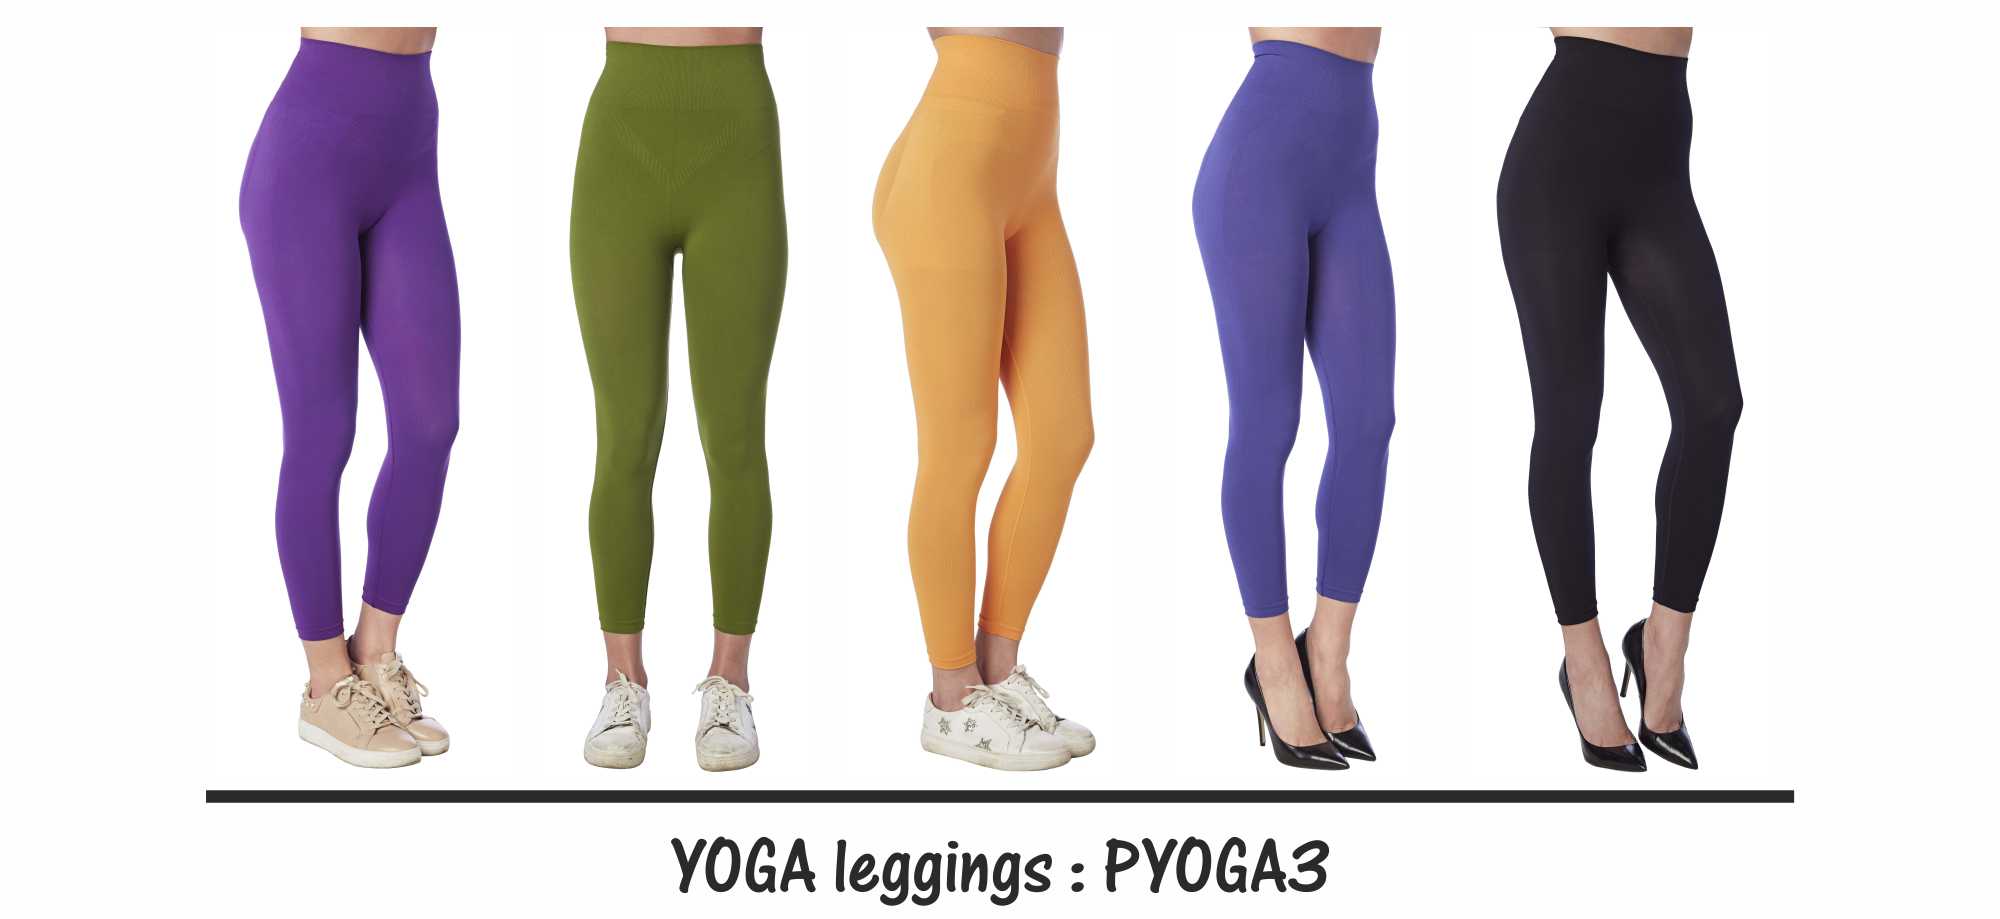 Compression garments, stockings to support Lipoedema Lymphedema